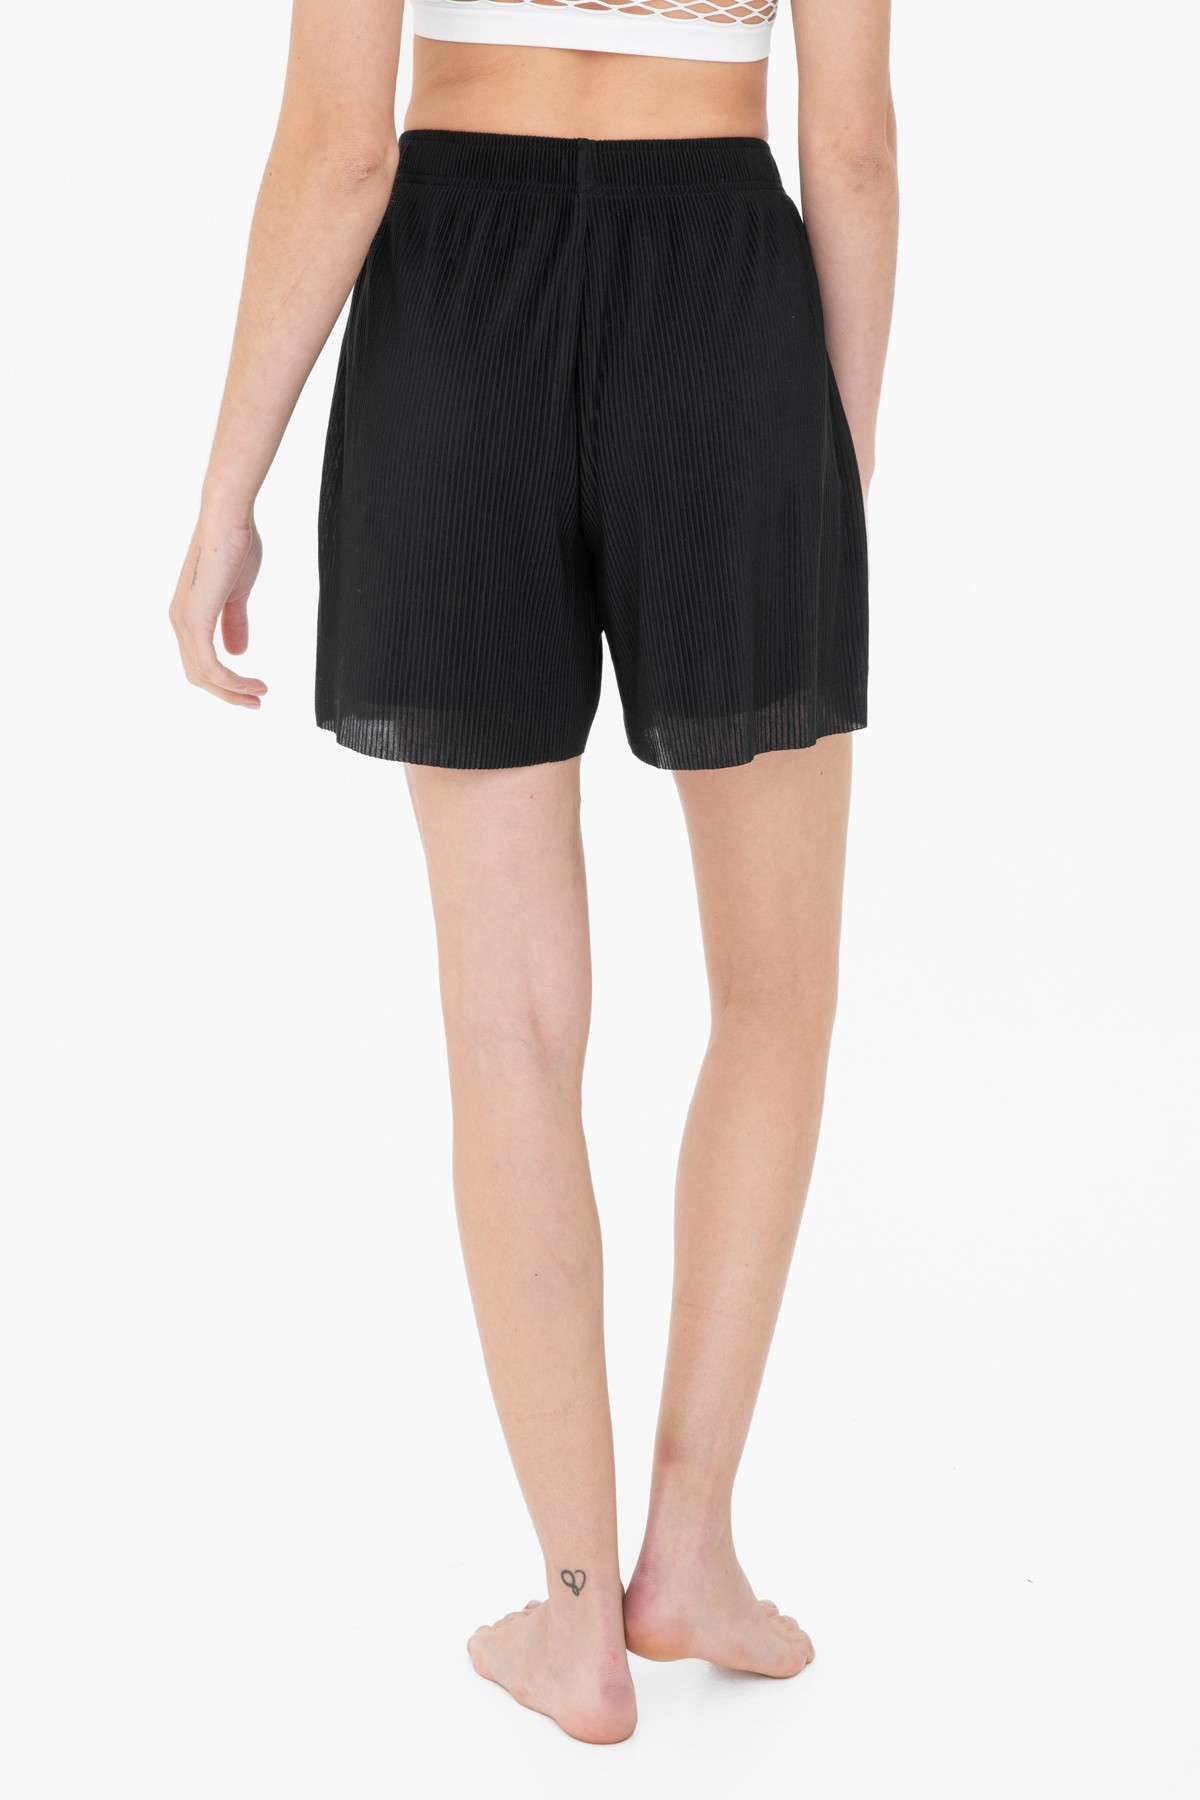 Conquer the Day Pleated Shorts